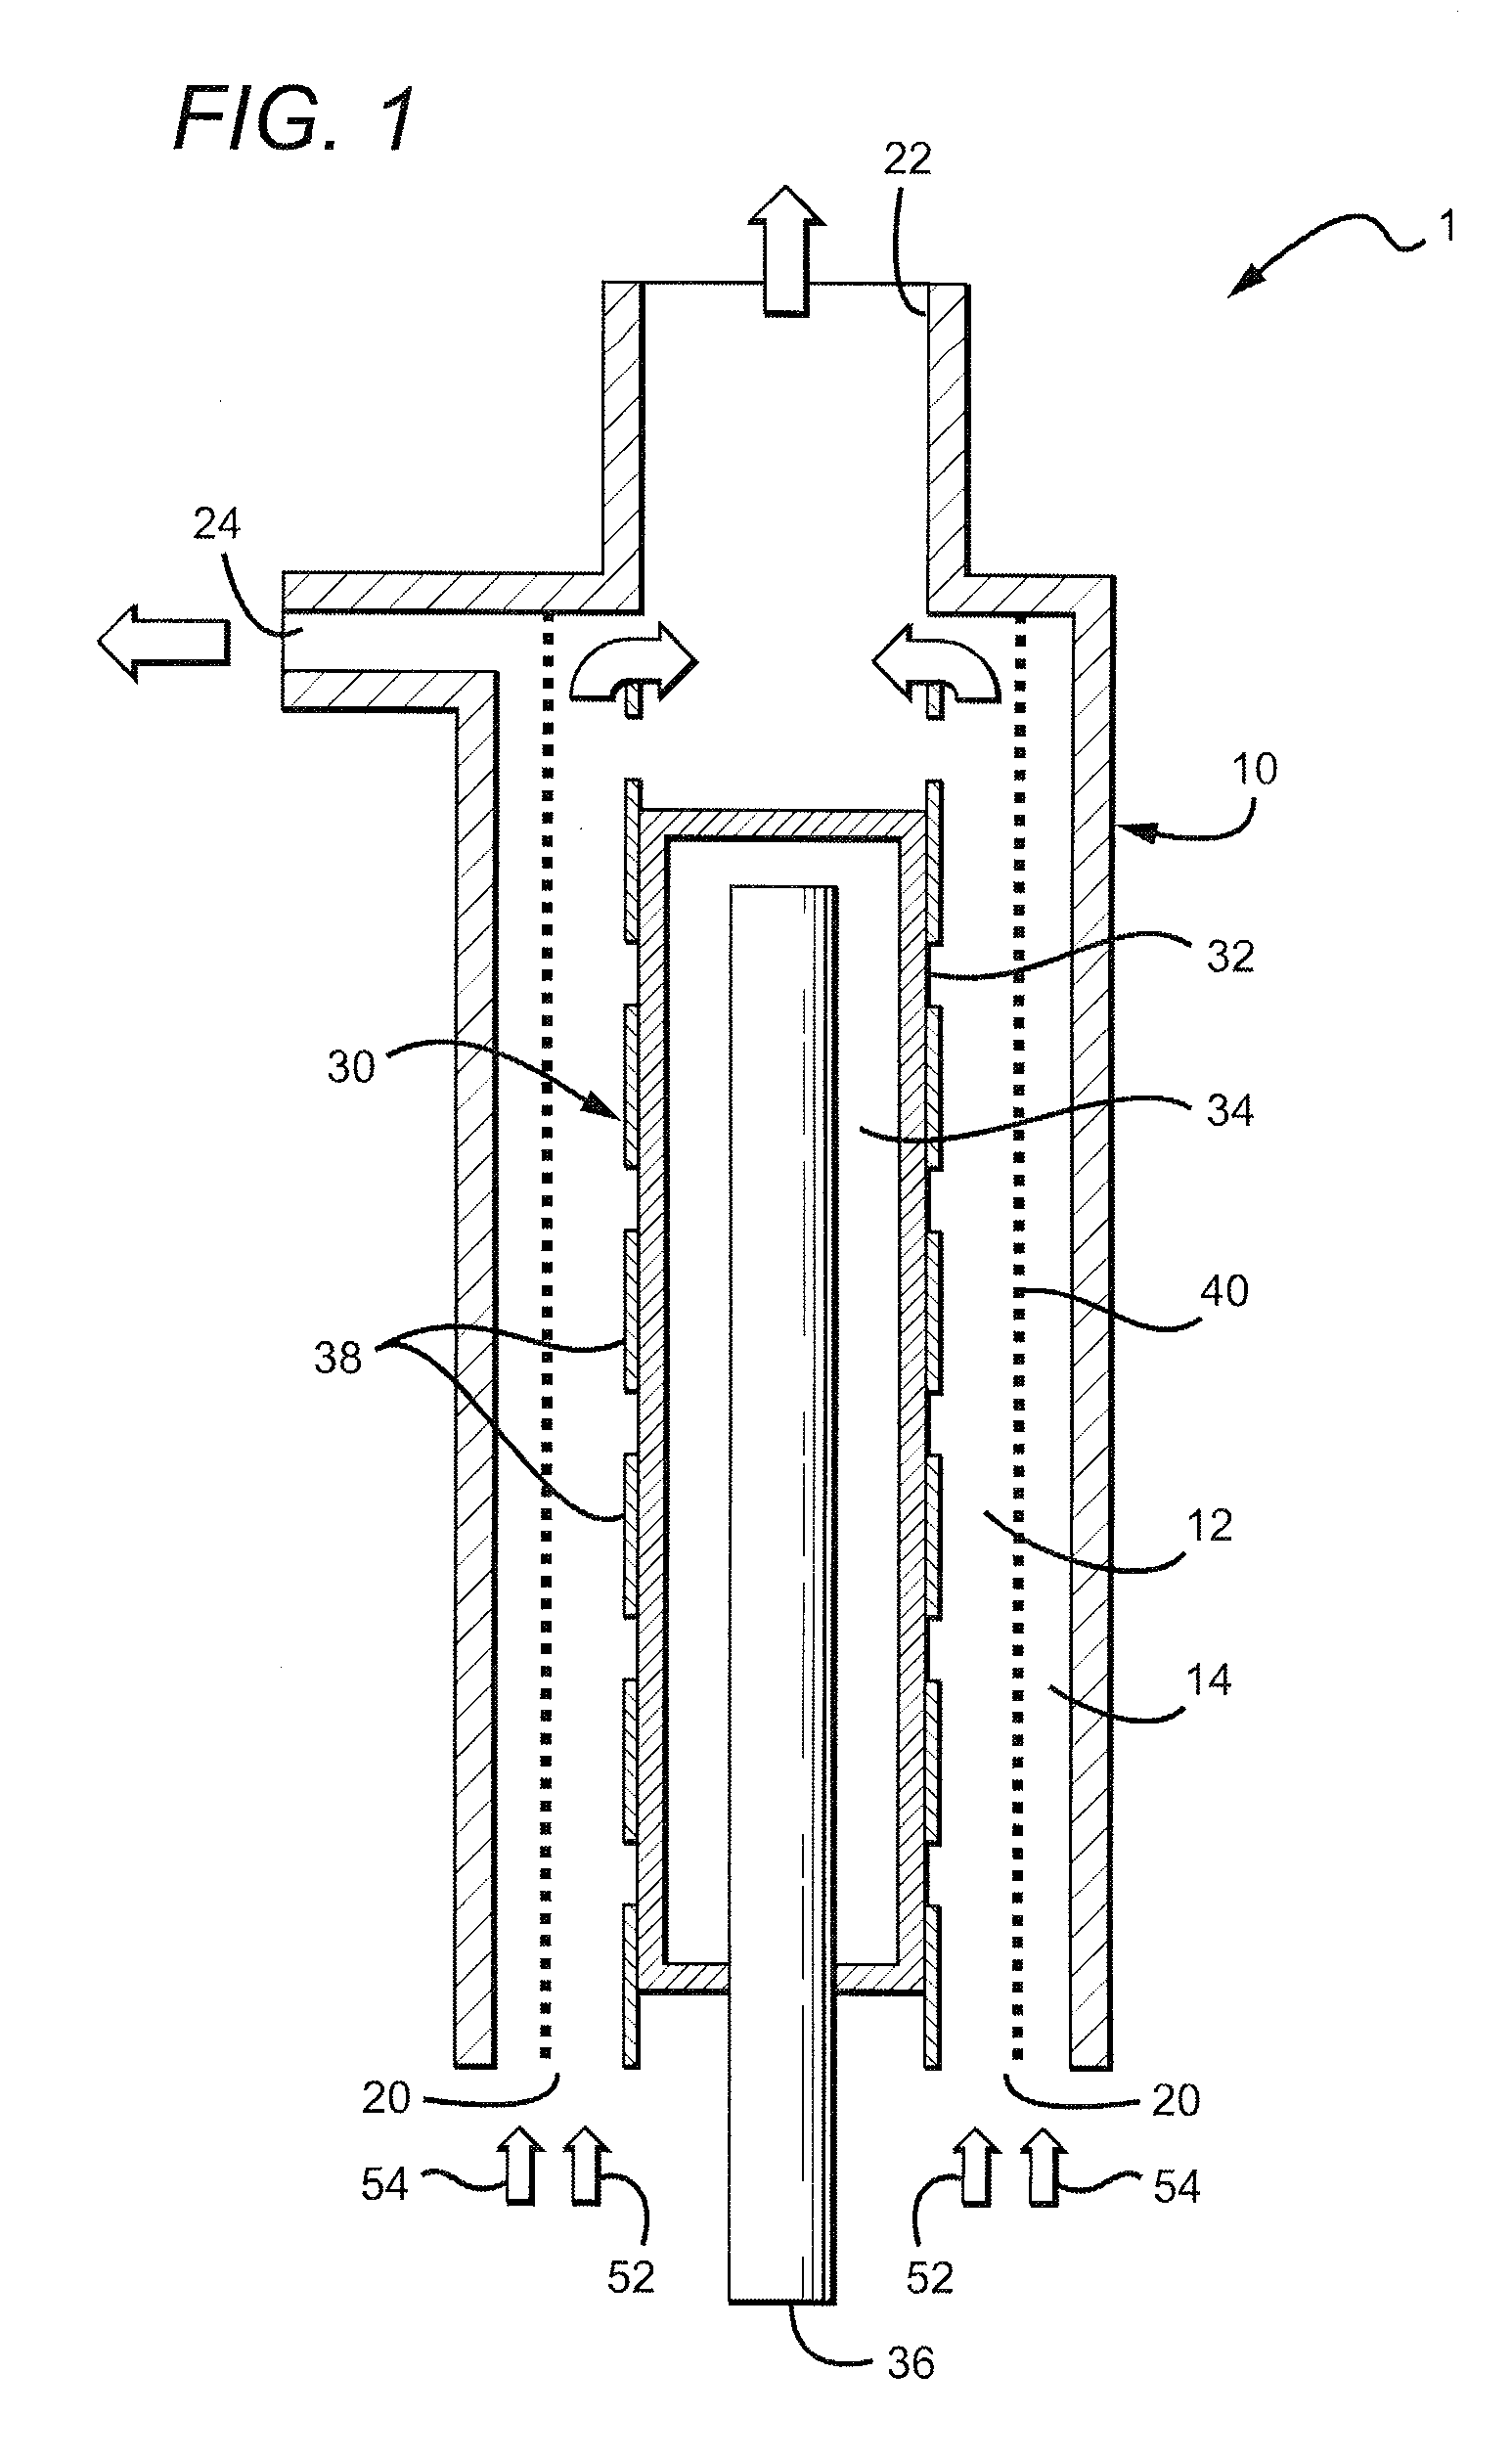 Activated water apparatus and methods